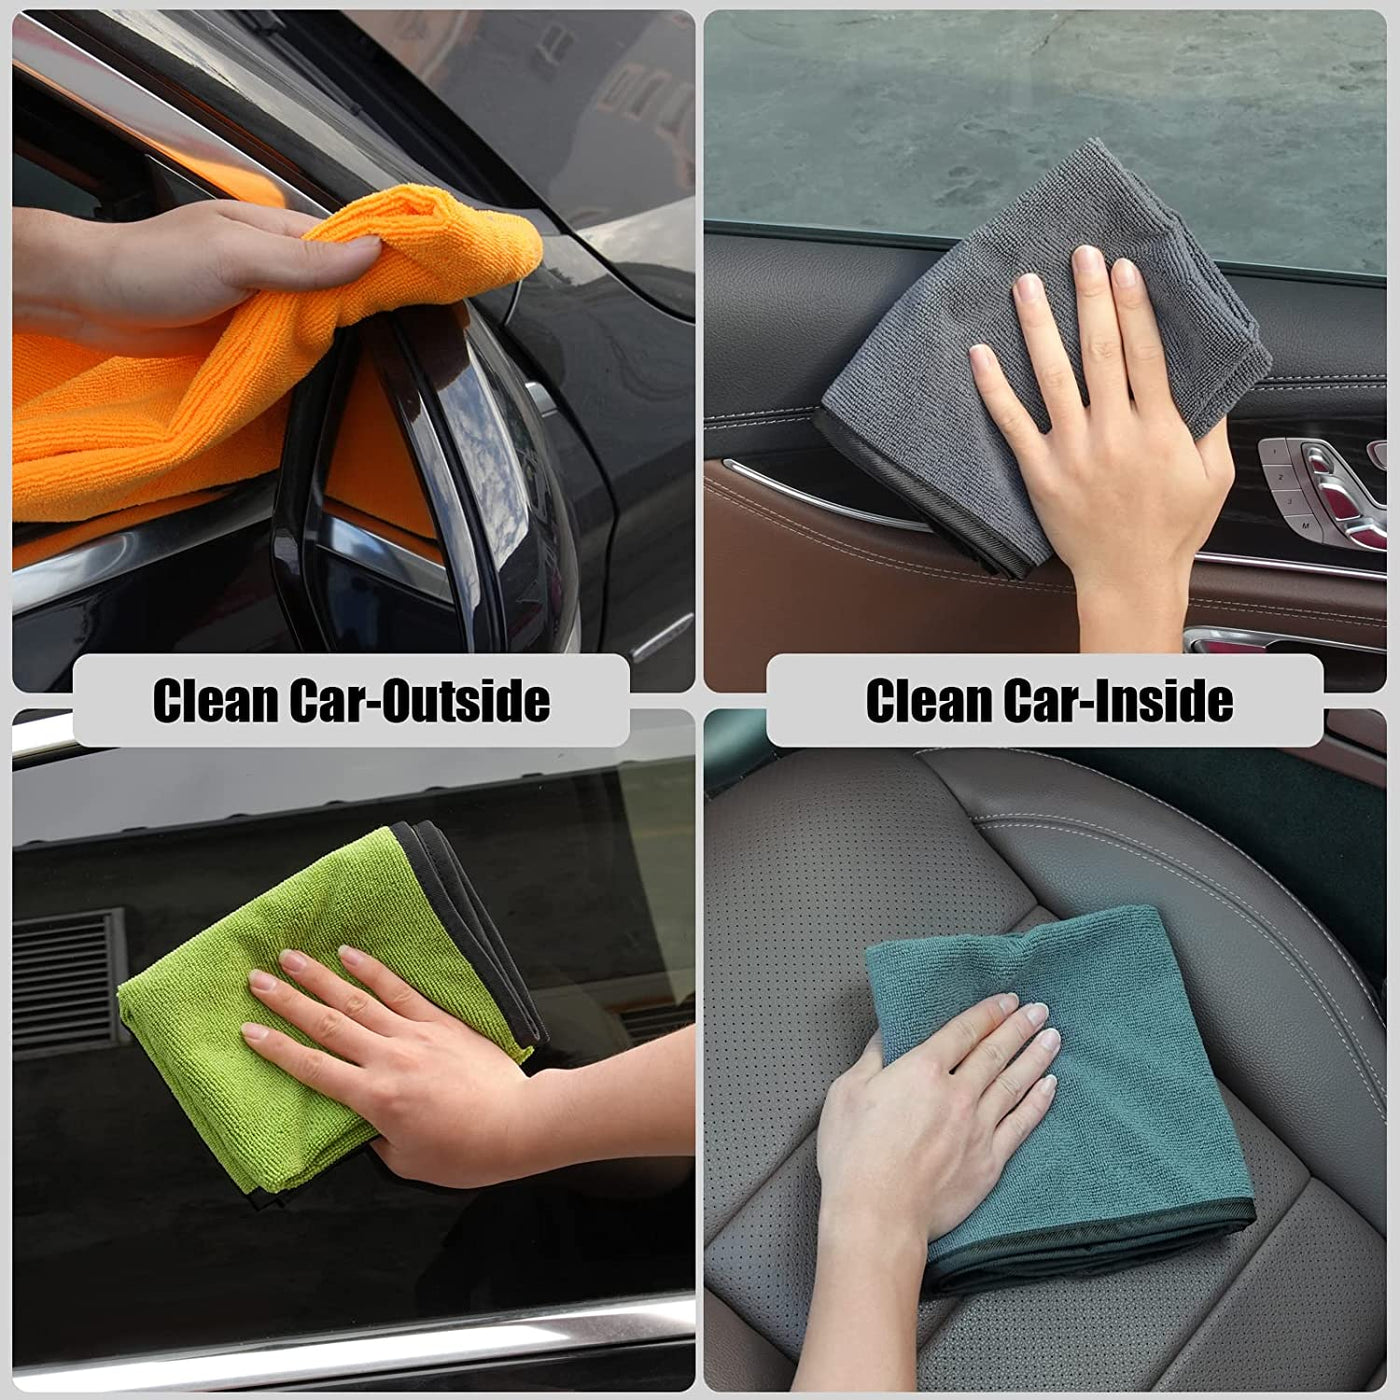  Microfiber Cleaning Cloth for Household,23.62" x 15.74"(8 Pack)